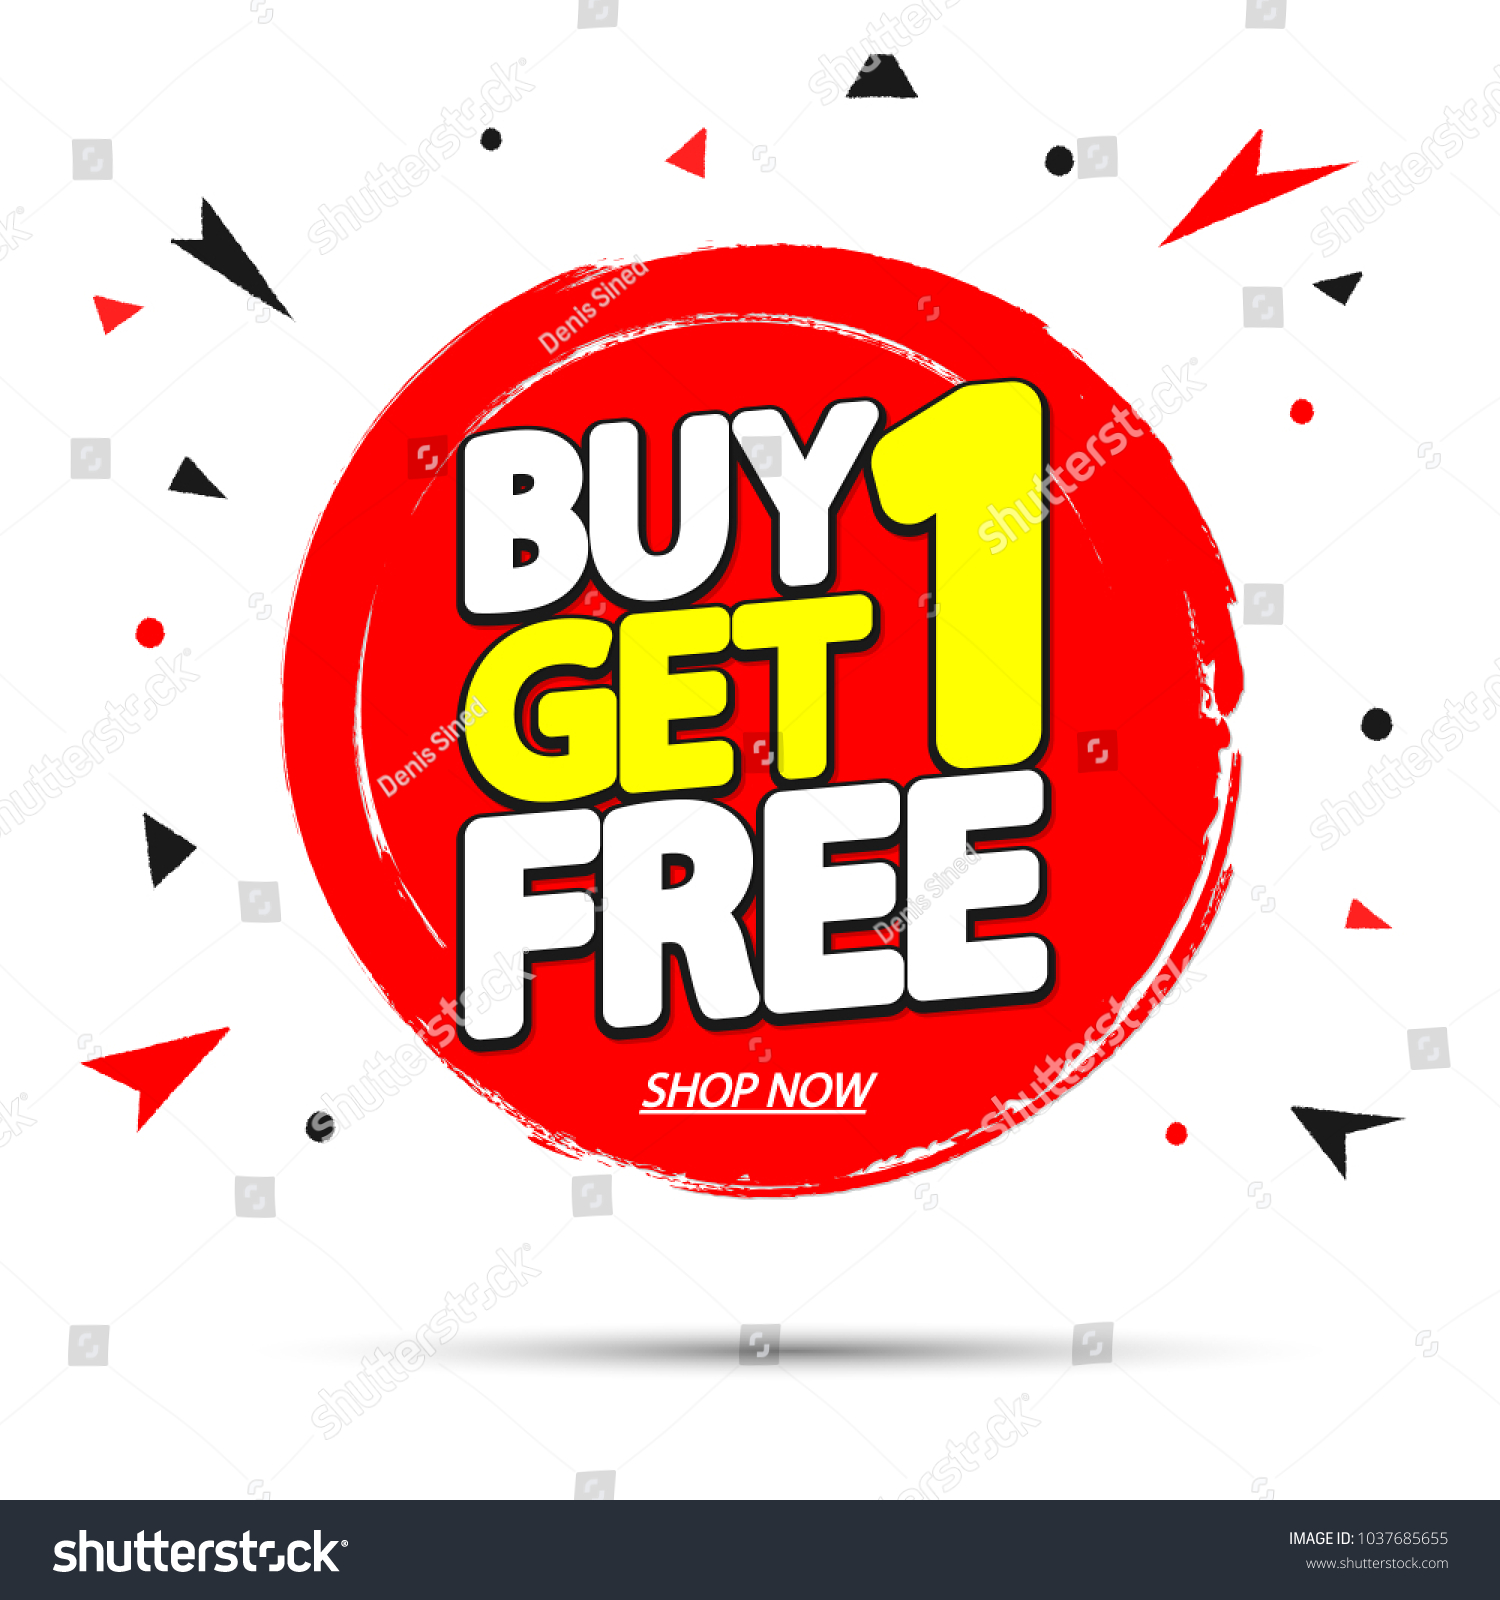 Buy 1 Get 1 Free, sale tag, banner design template, discount app icon, vector illustration #1037685655